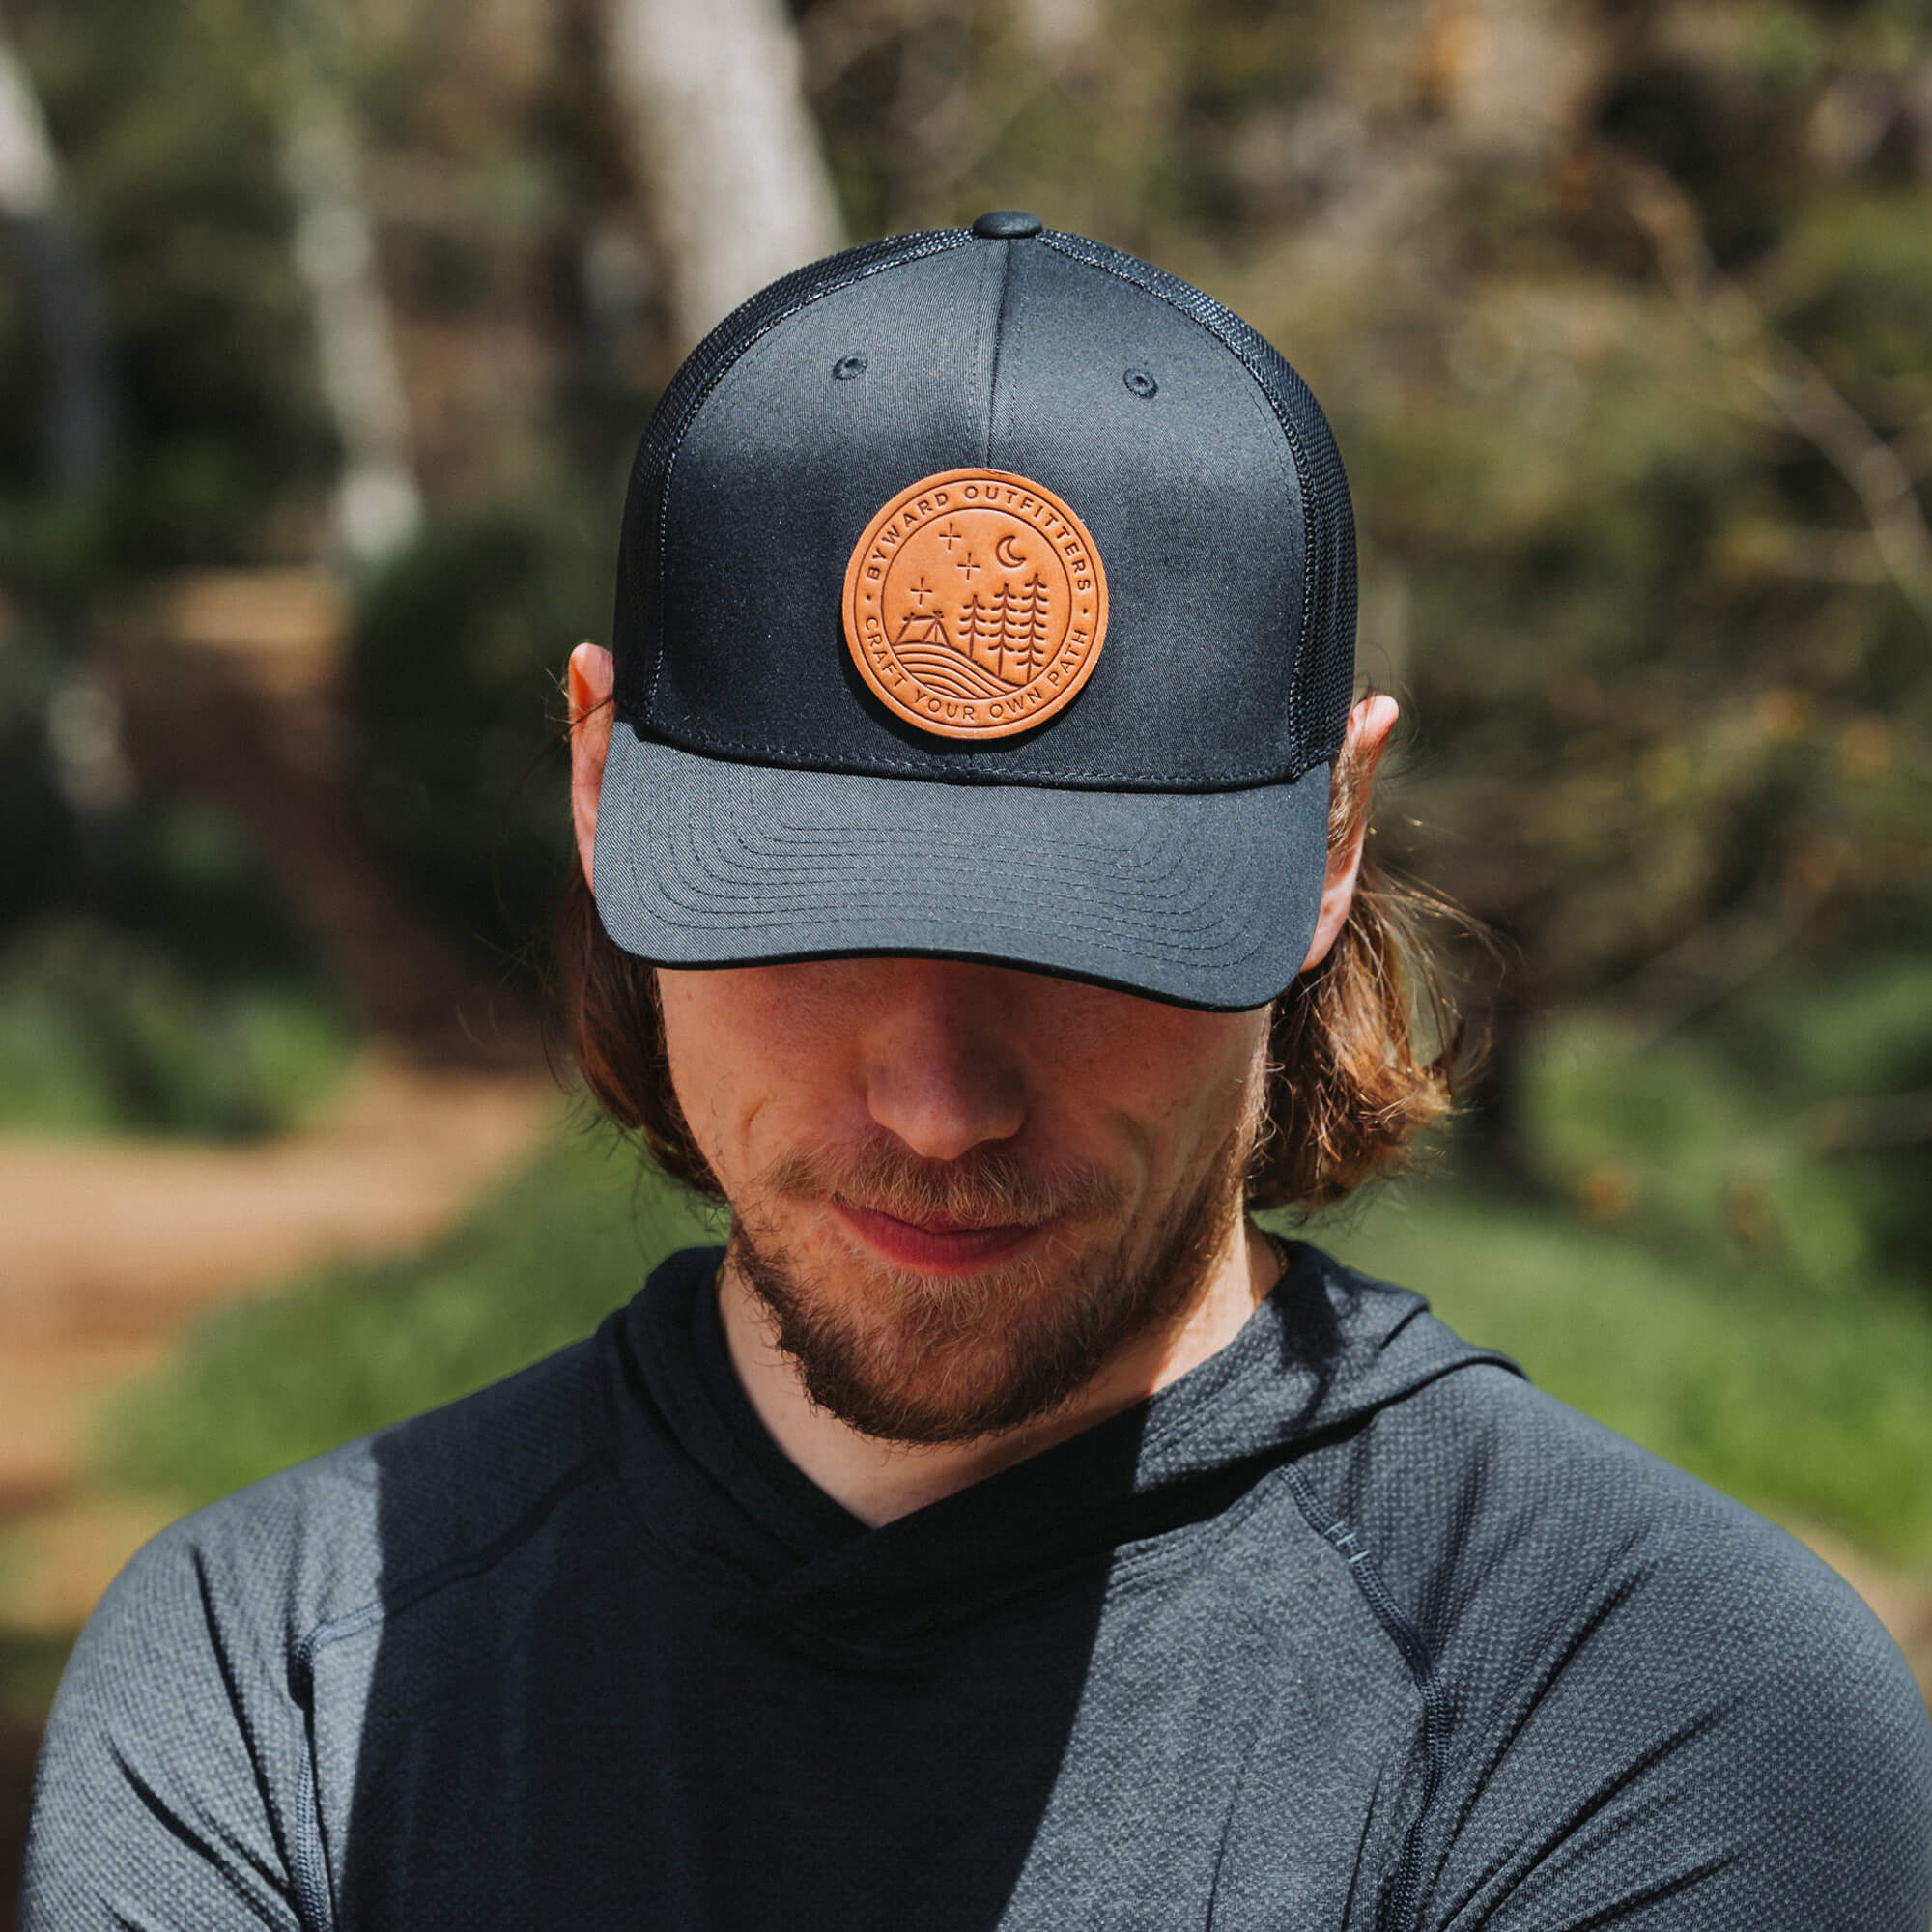 Black trucker hat with full-grain leather patch of Stellar Night | BLACK-005-001, CHARC-005-001, NAVY-005-001, HGREY-005-001, MOSS-005-001, BROWN-005-001